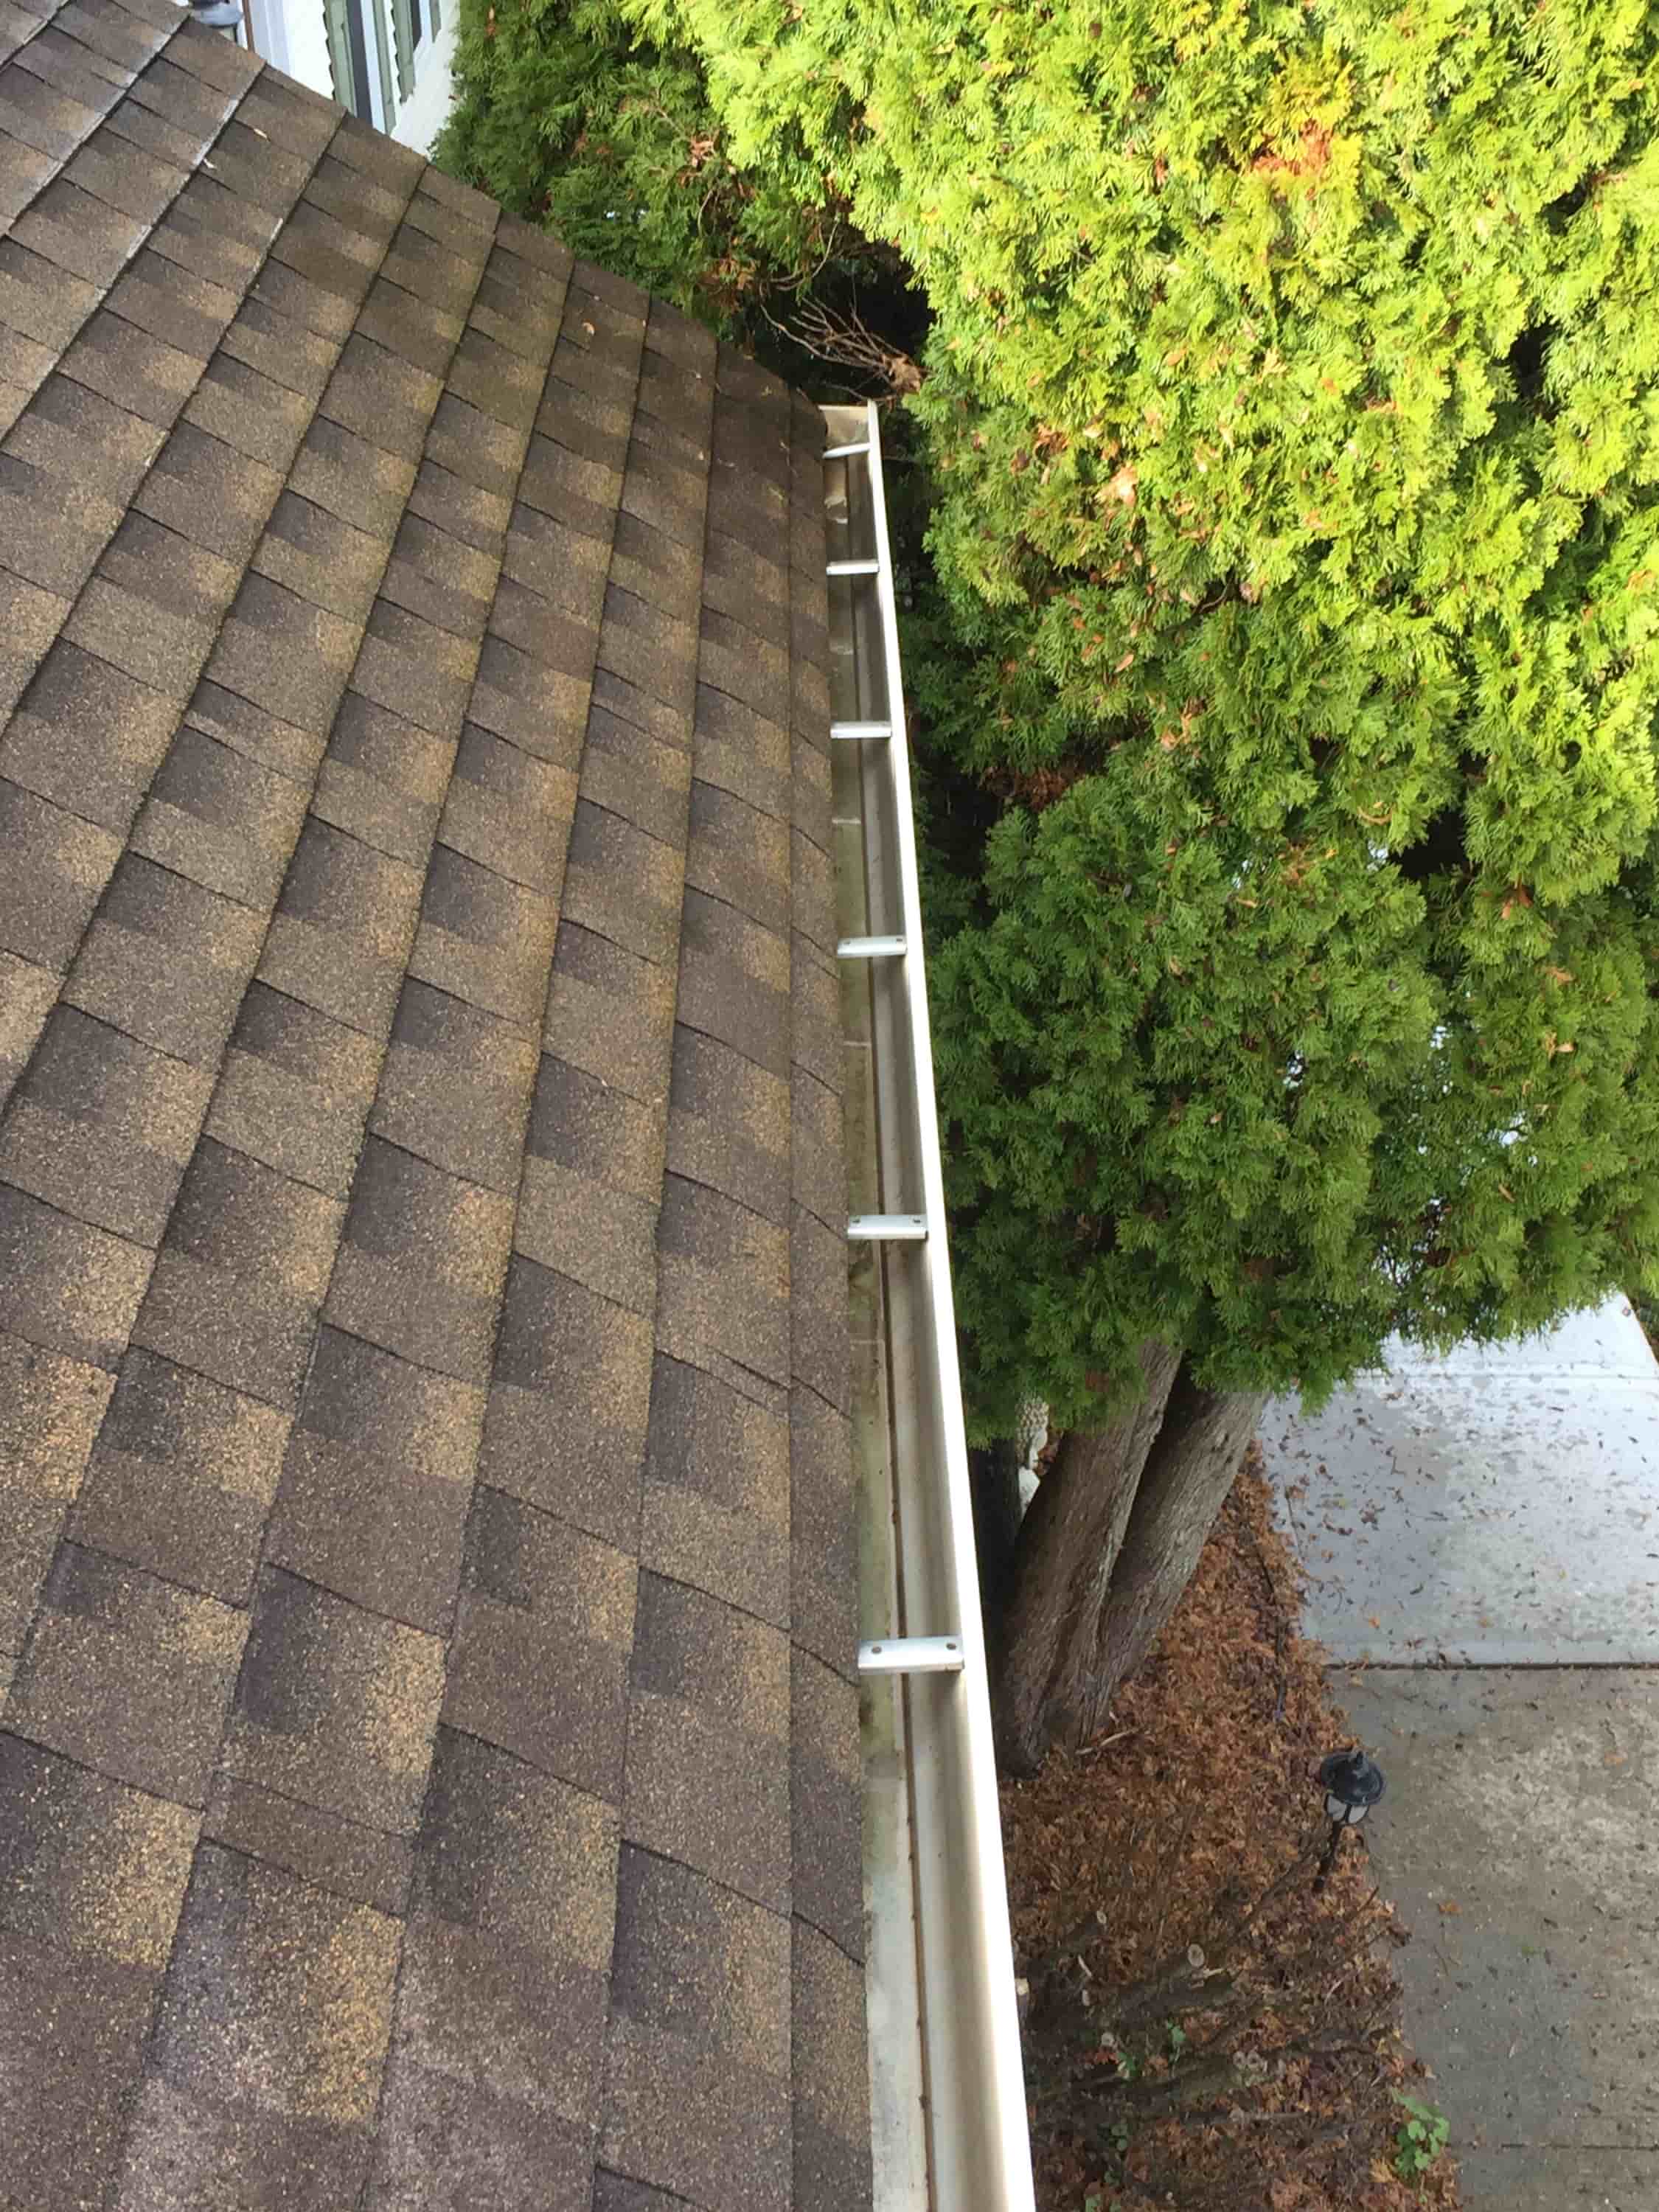 clogged gutter downspout